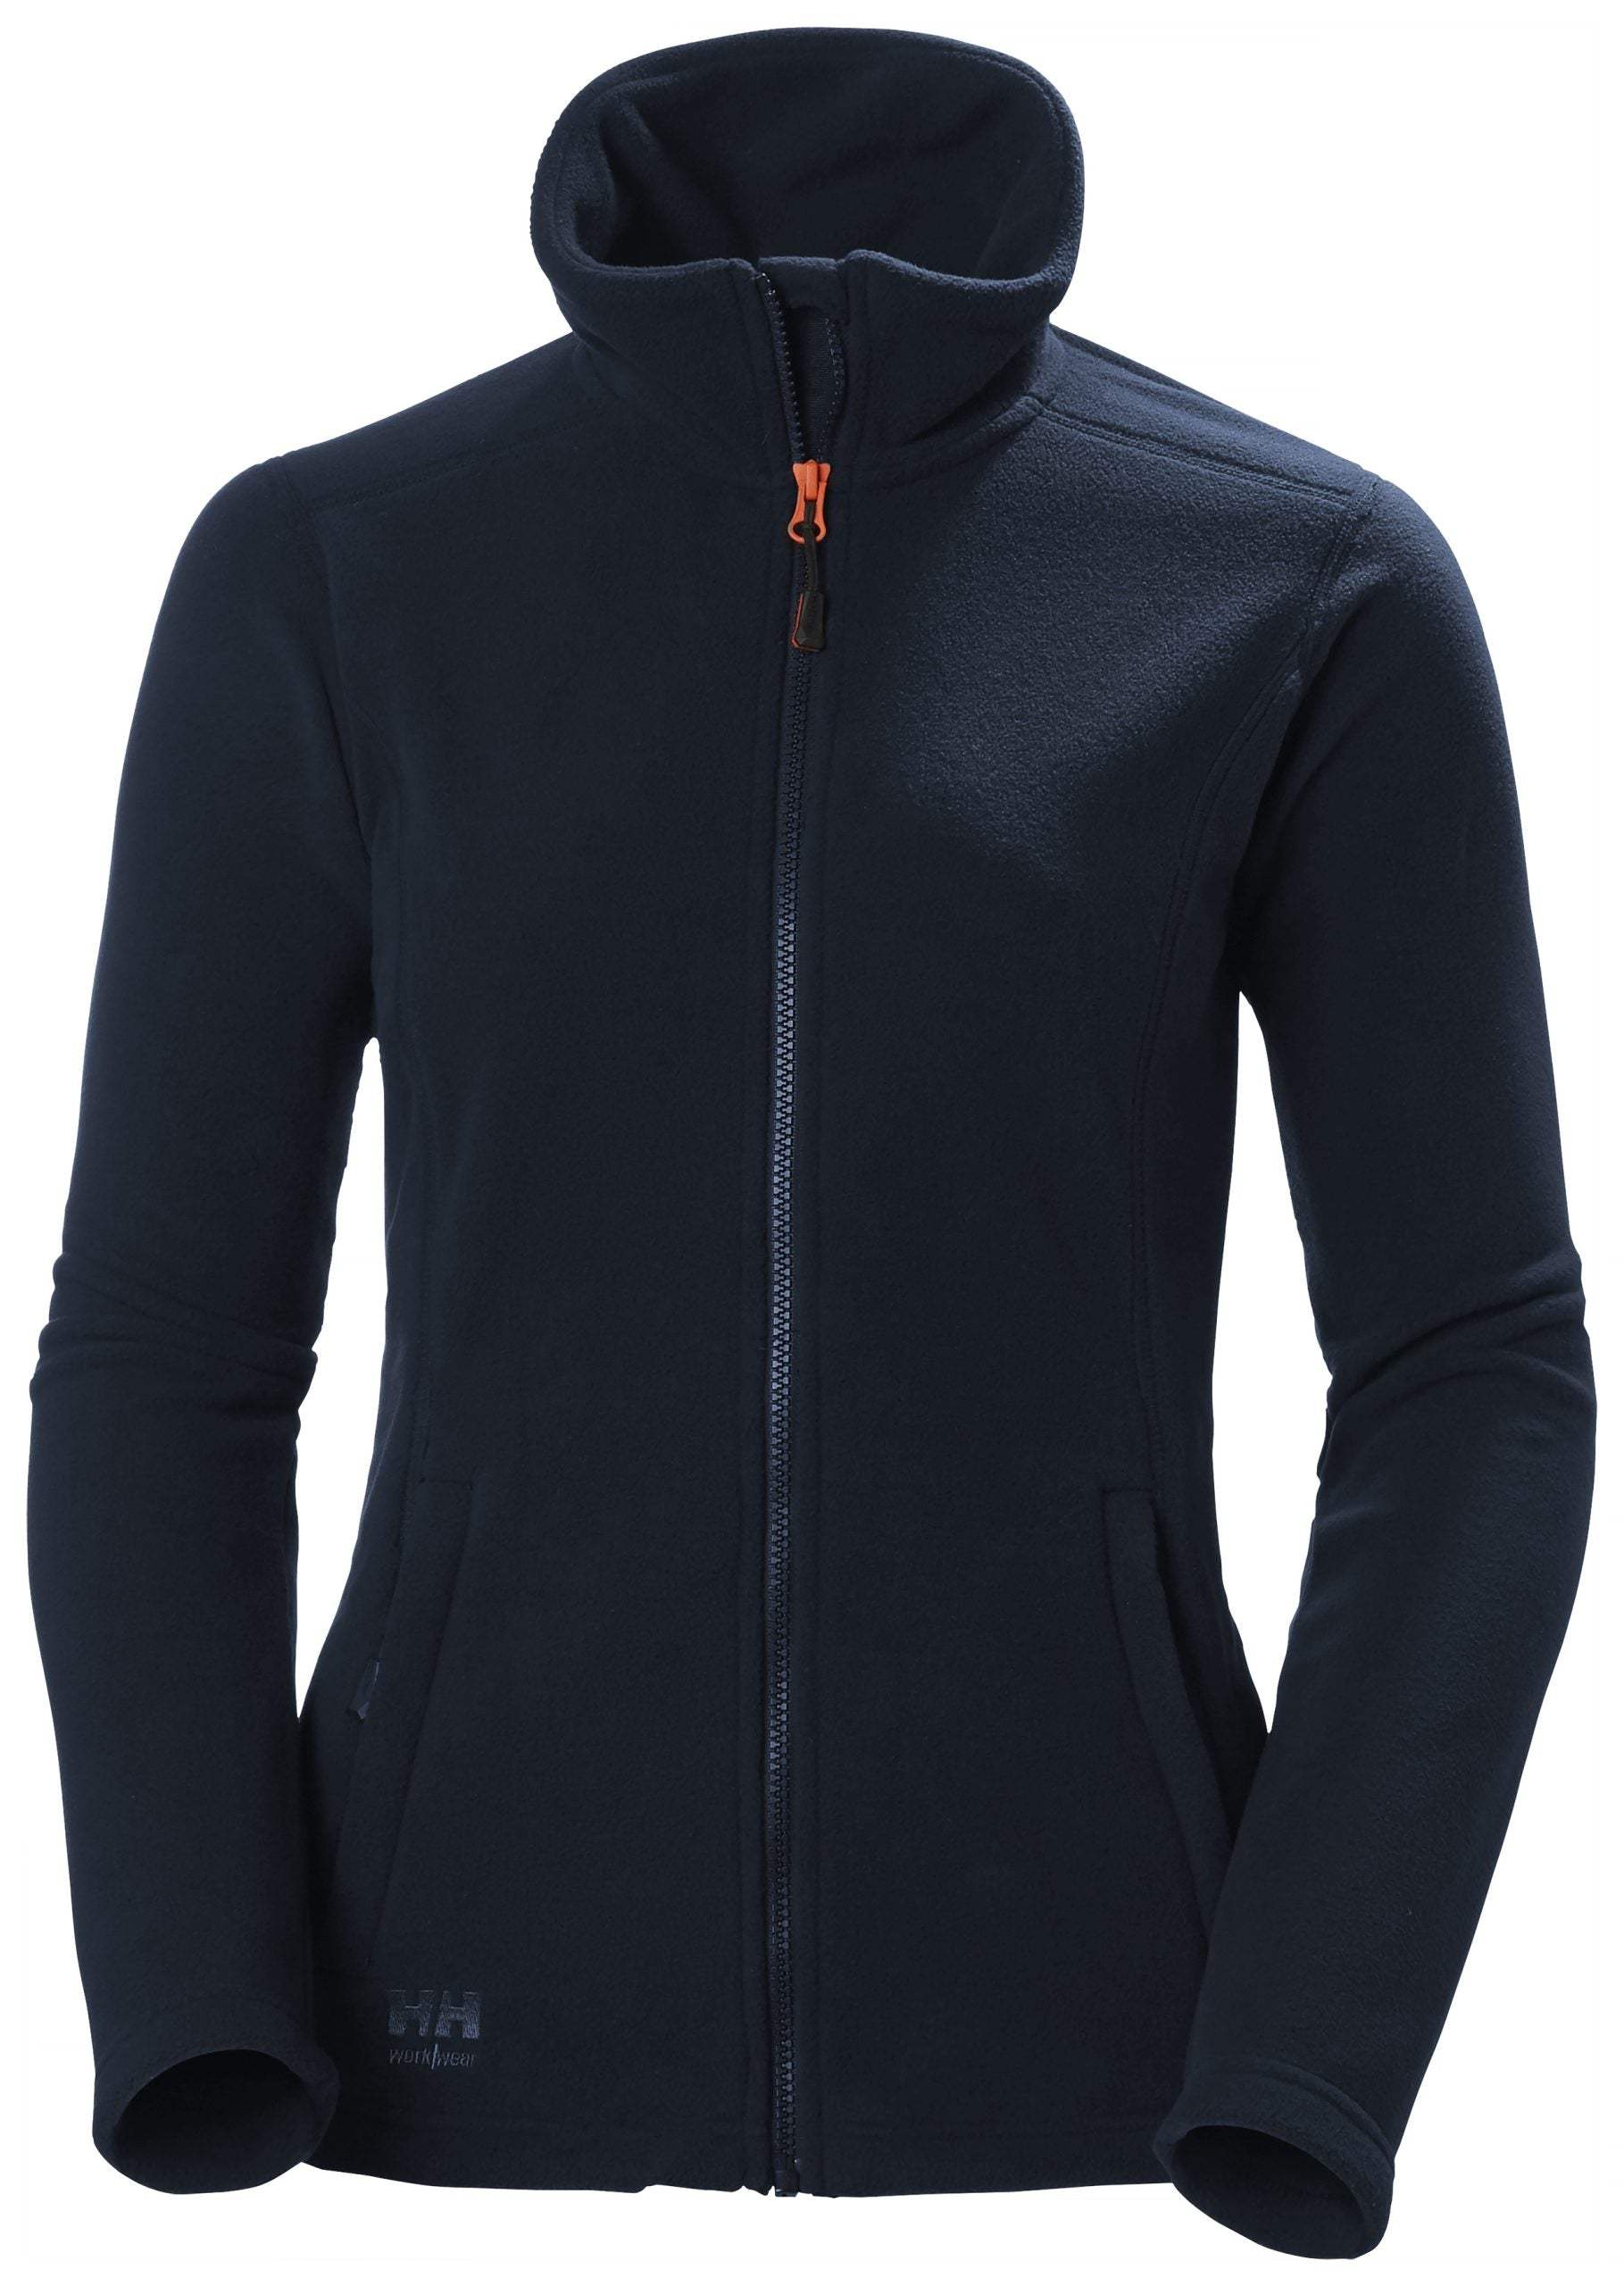 Women’s Luna Fleece Jacket by Helly Hansen - The Luxury Promotional Gifts Company Limited